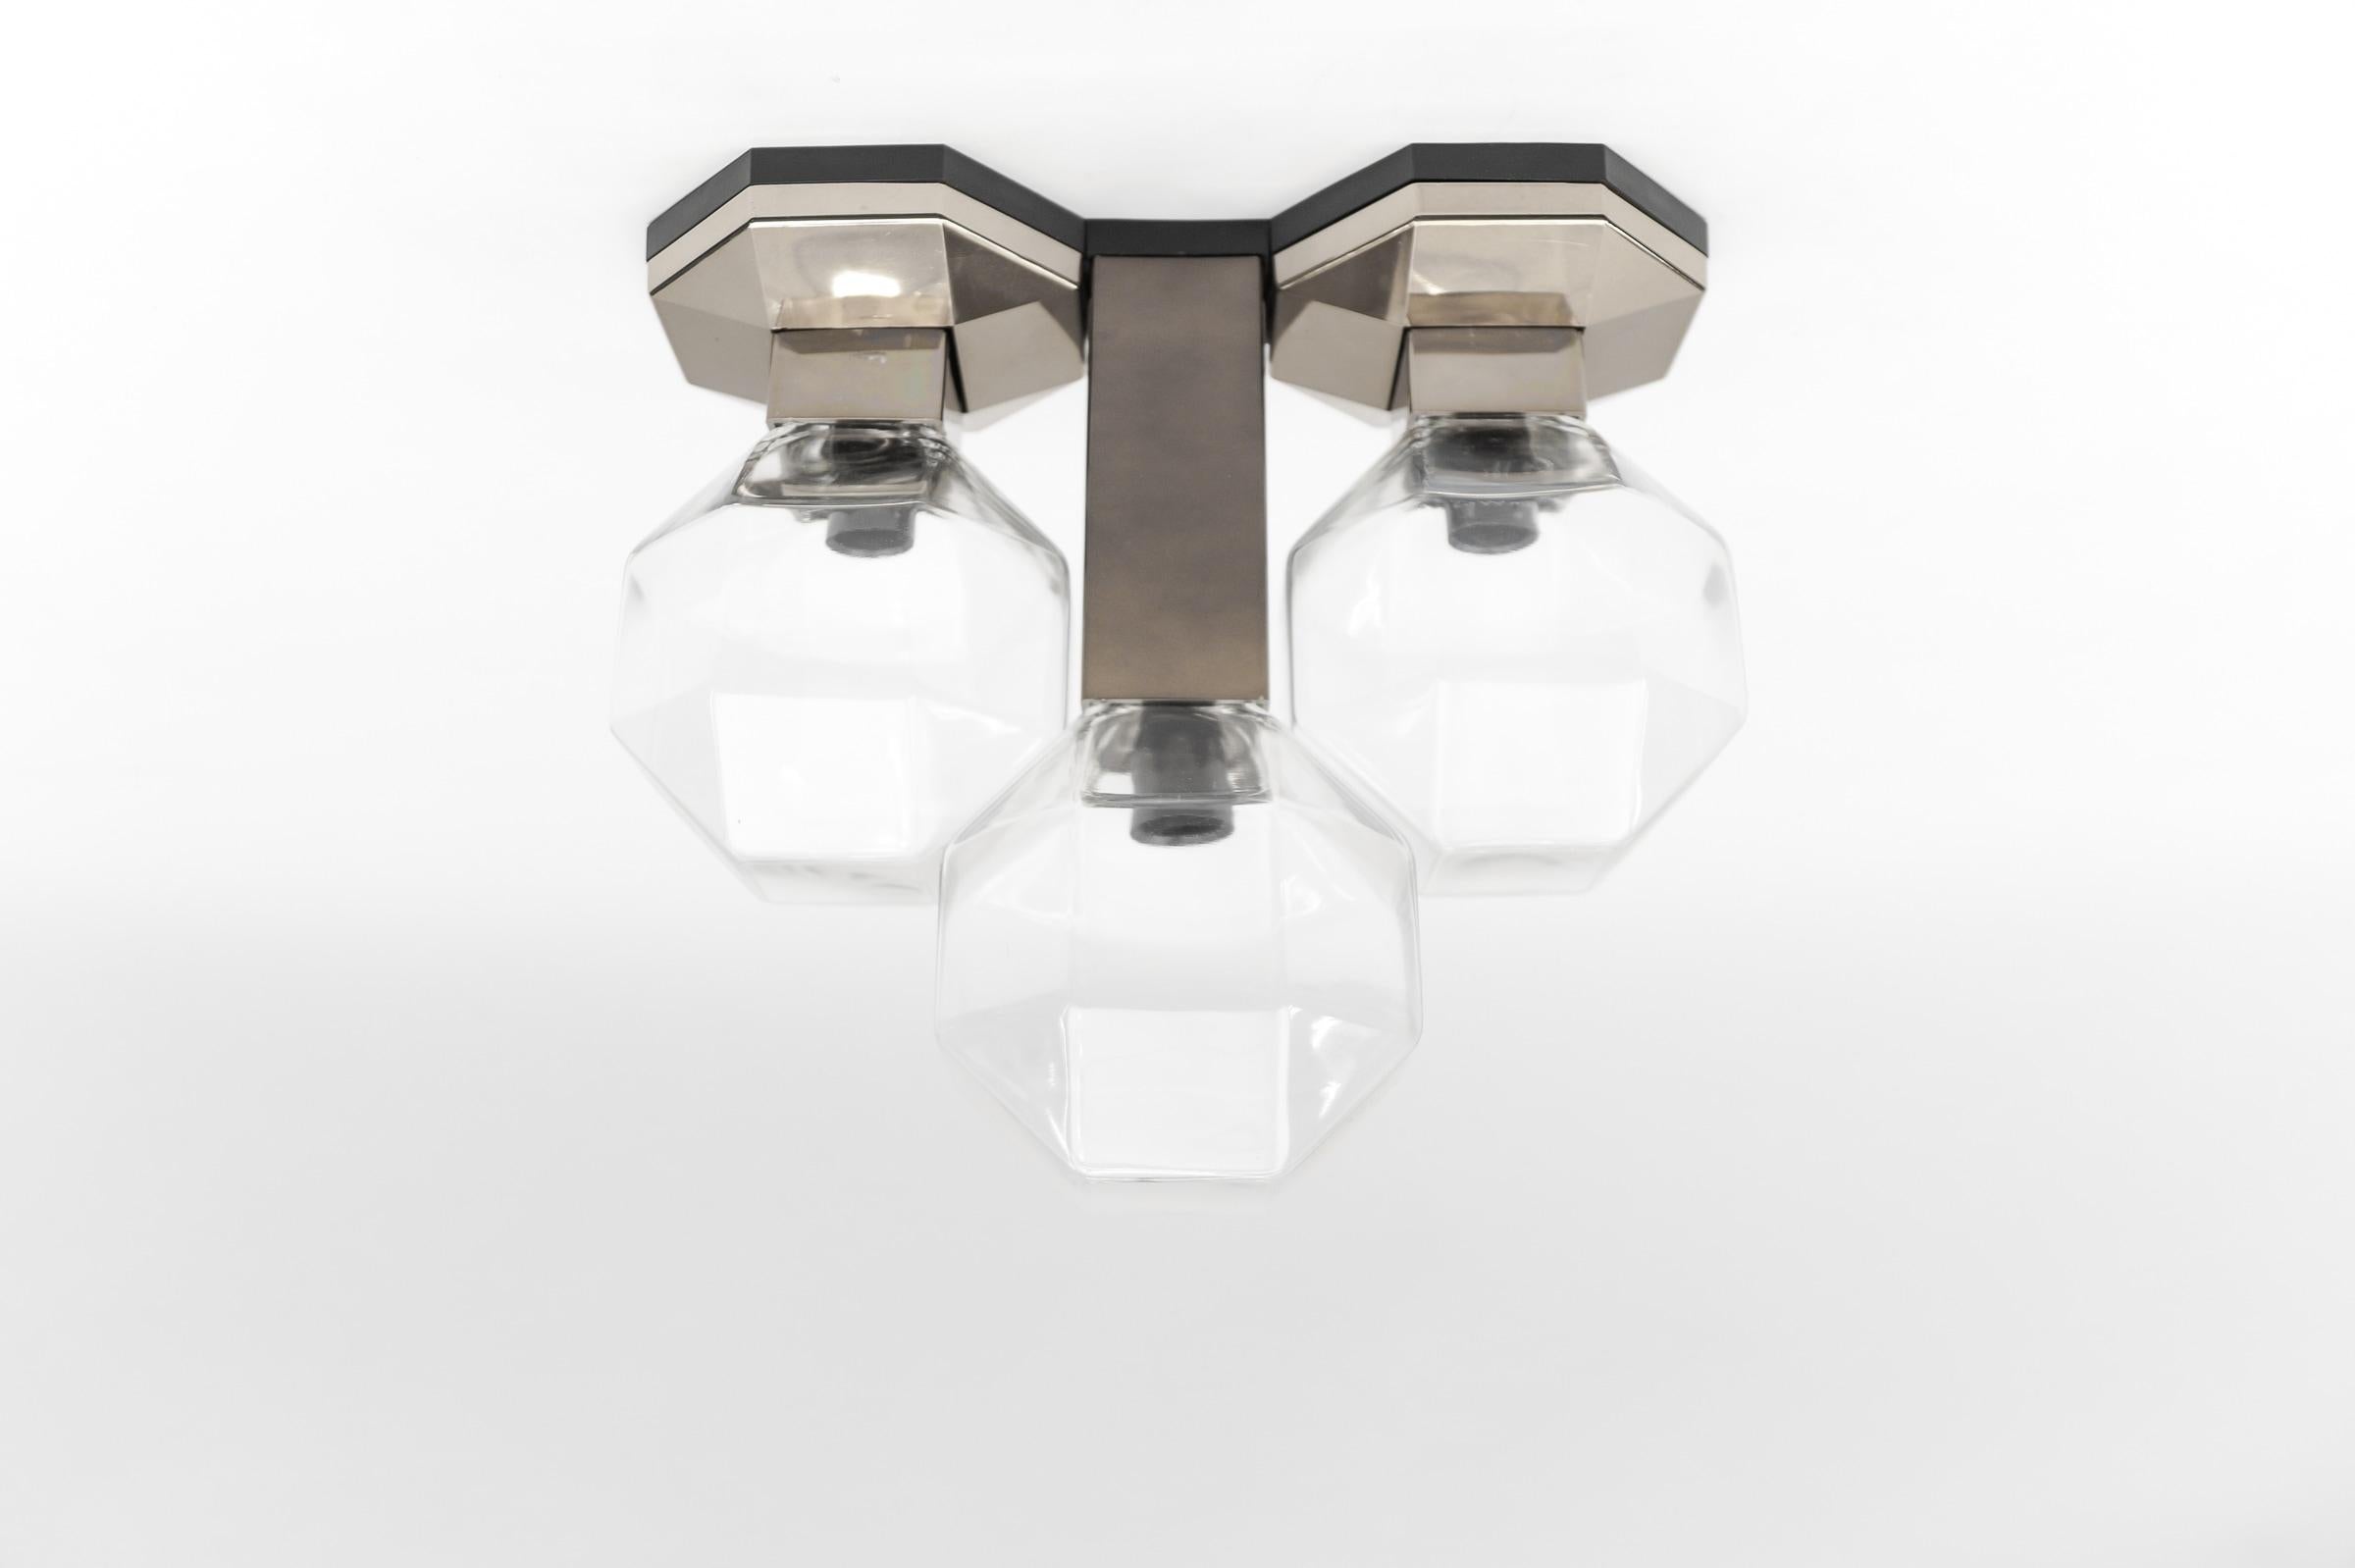 - Wall or flush mount ceiling lamp by Motoko Ishii for Staff Lighting Company
- 3 glass lights
- The lamp received the iF design award in 1974

The wall lamp come with 3 x E14 / E15 Edison screw fit bulb holder, is wired and in working condition. It